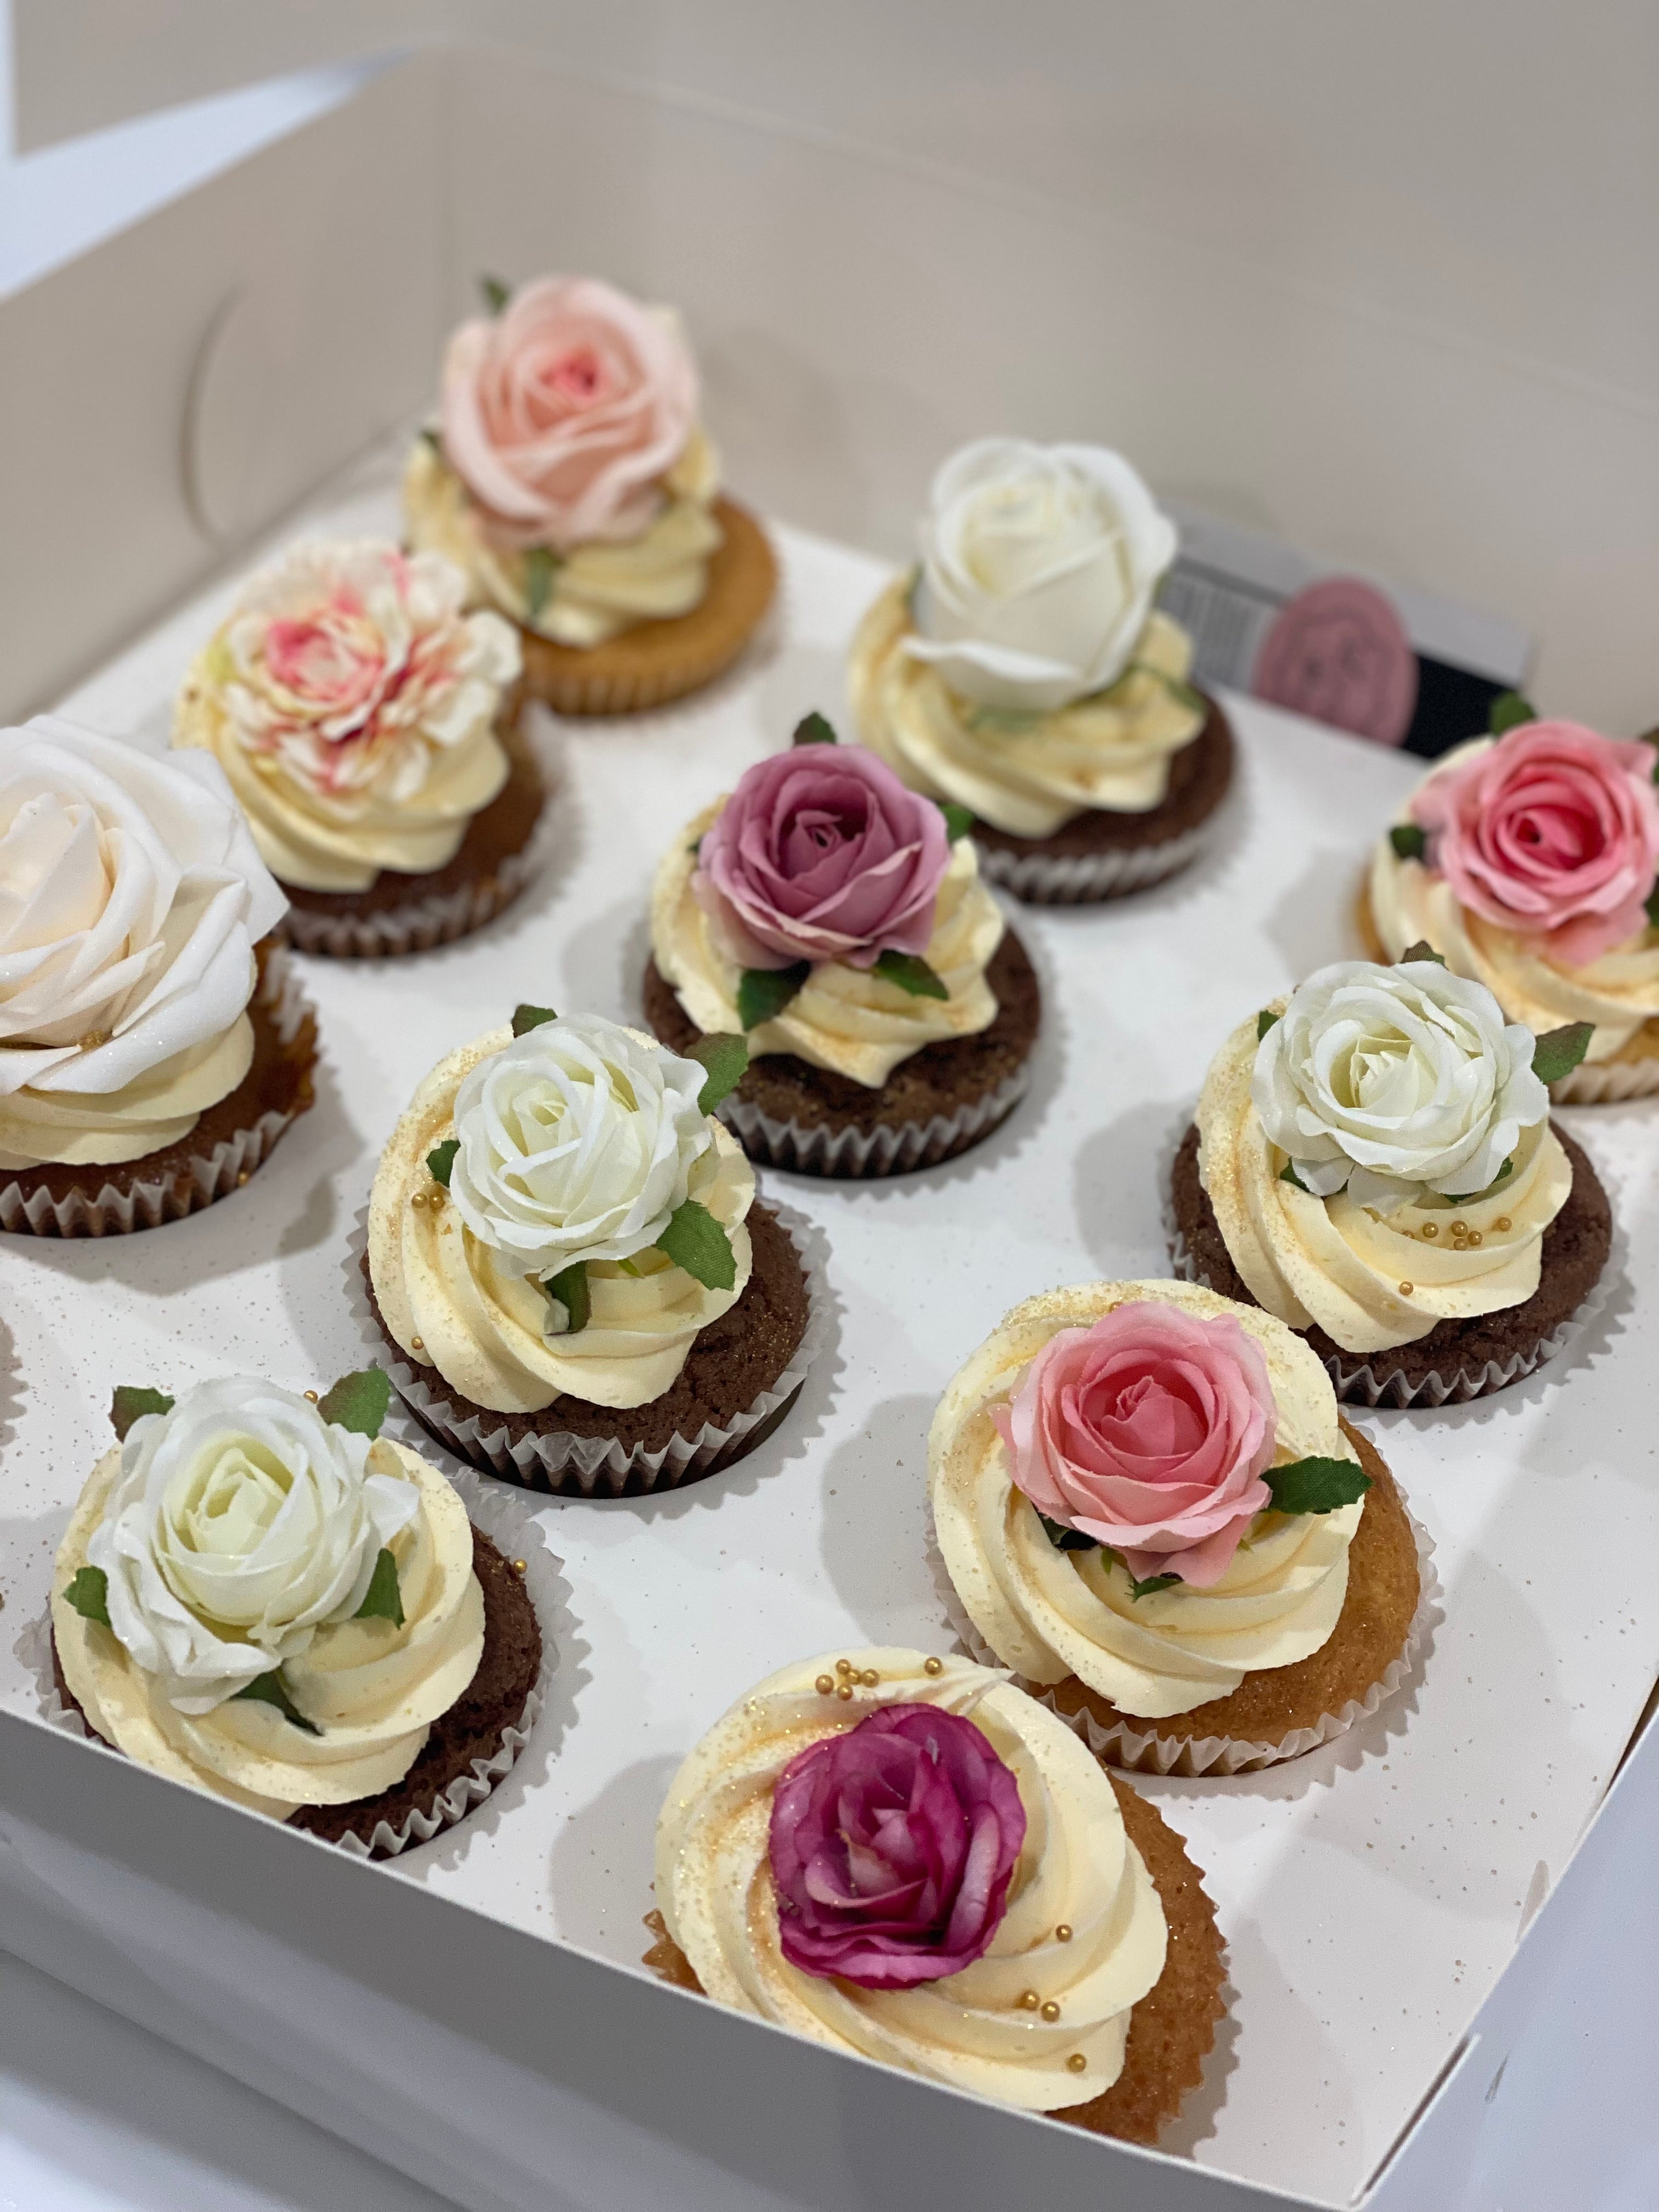 Blissful blooms- 12 cupcakes